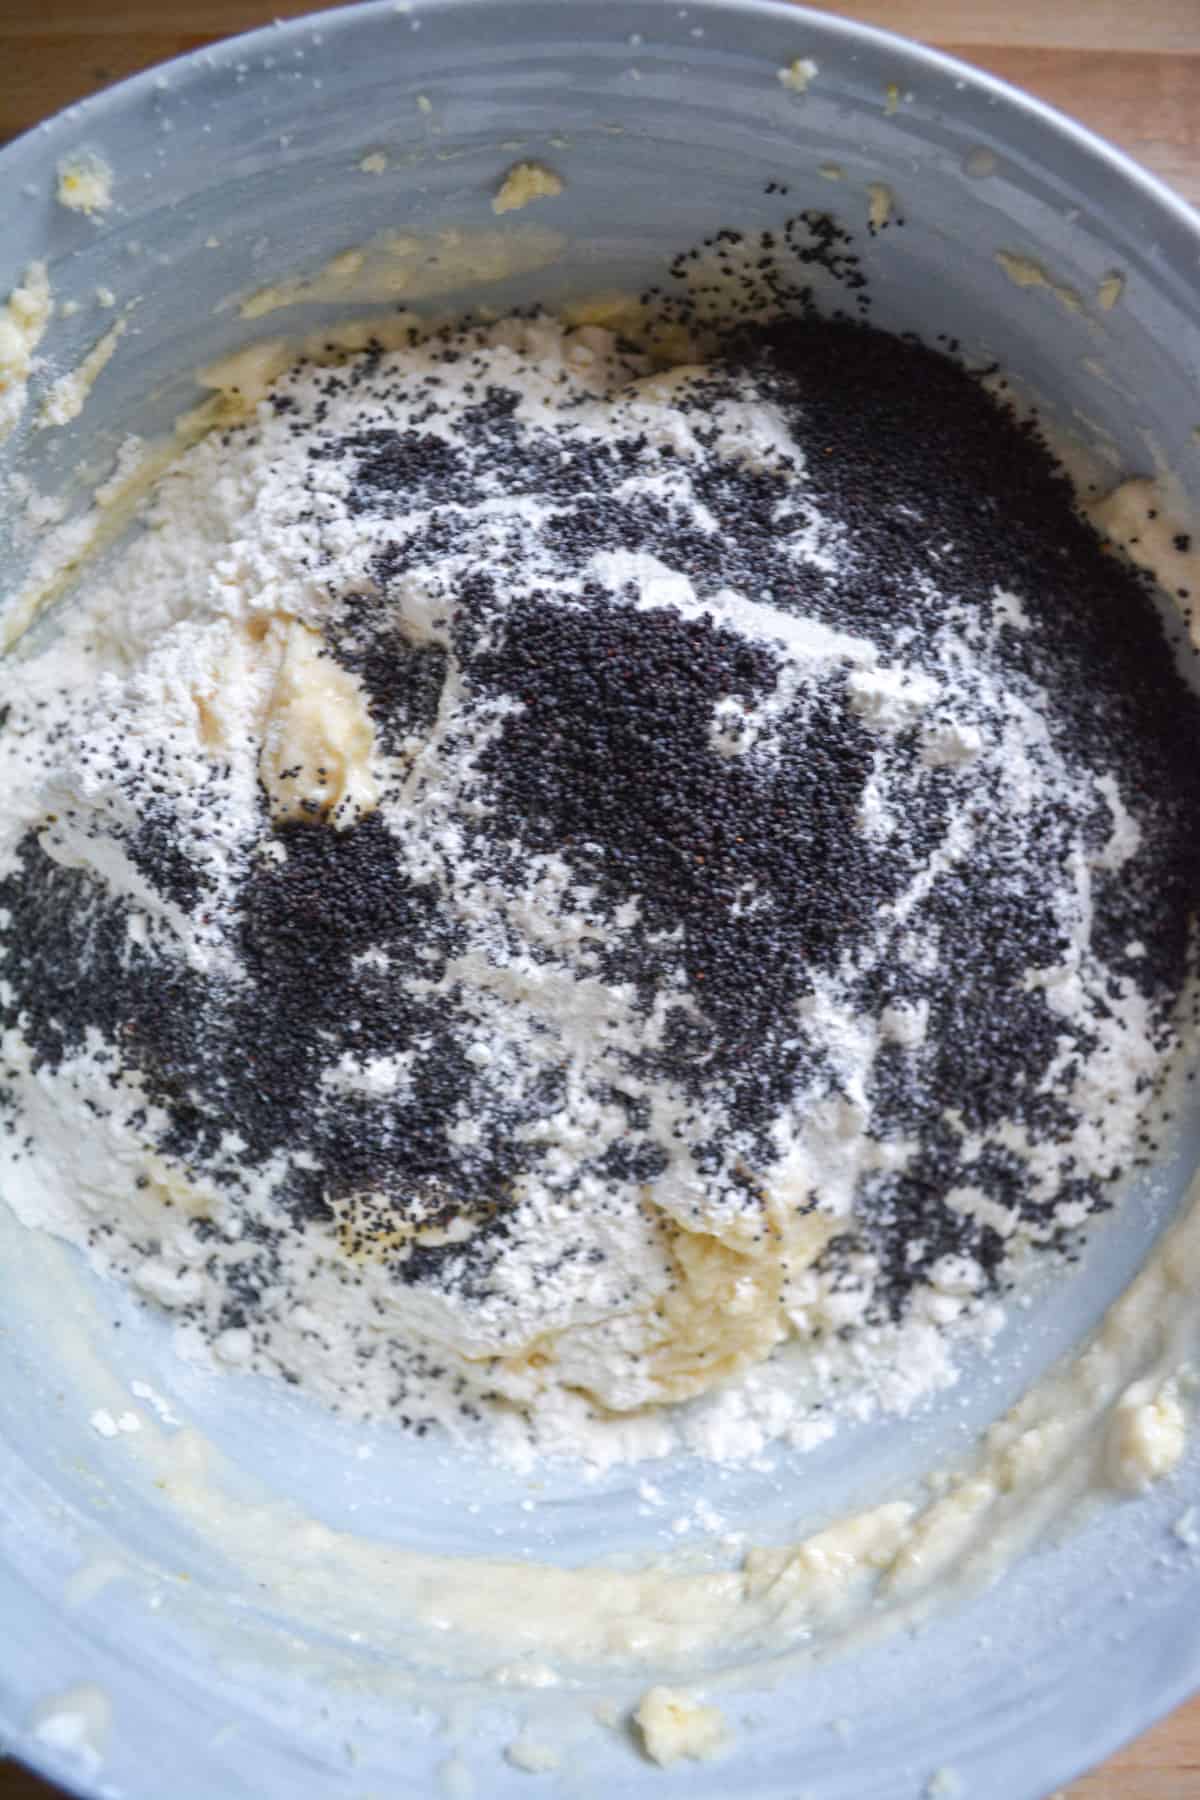 The remaining dry ingredients in the bowl with the poppyseeds.